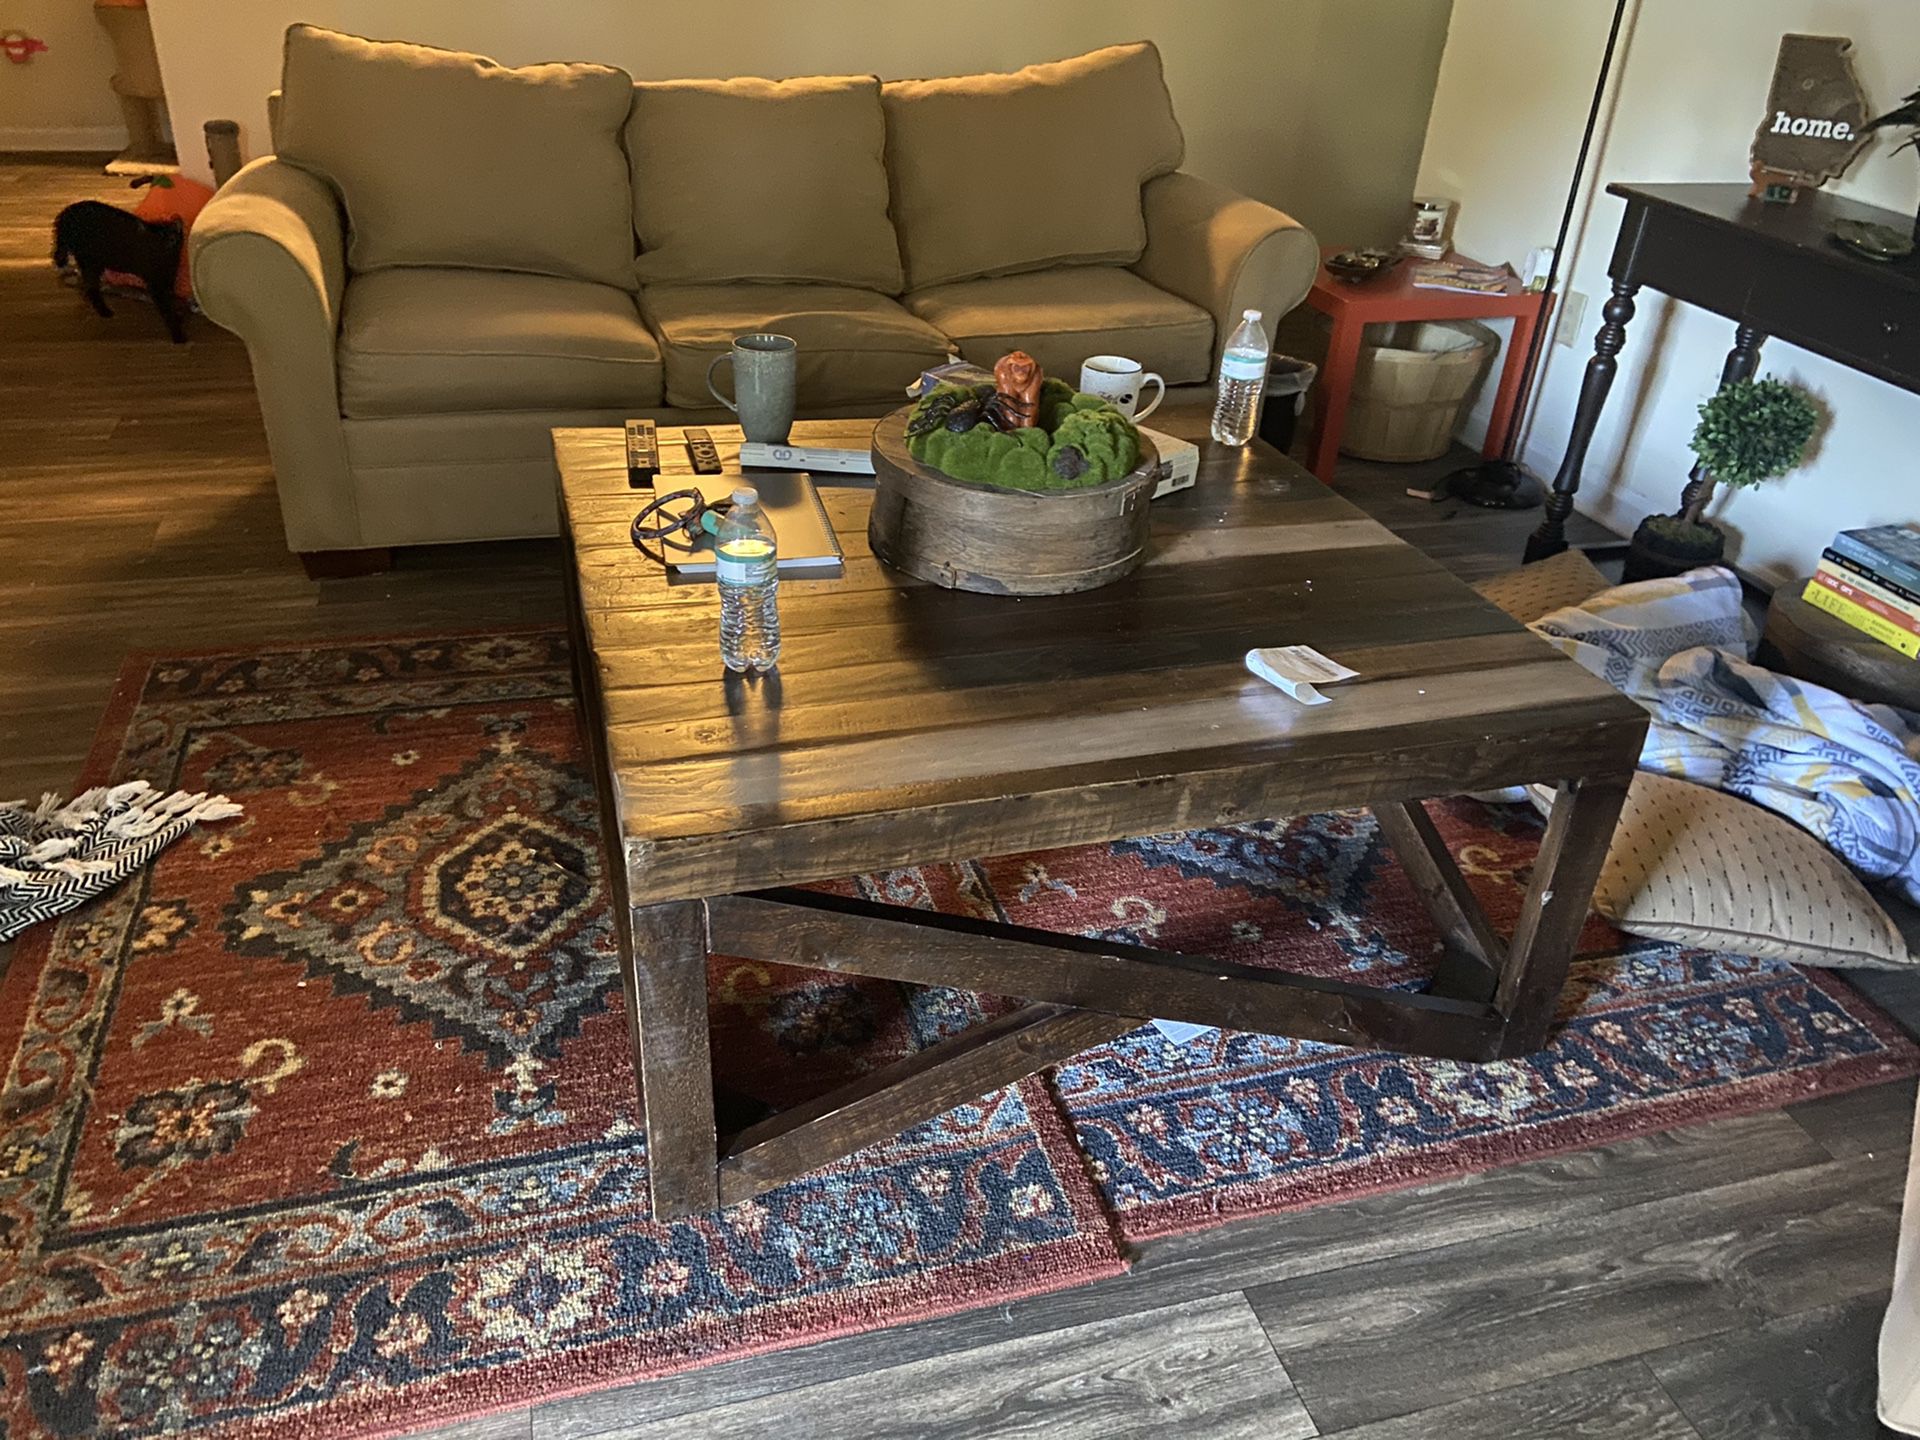 Table and rugs